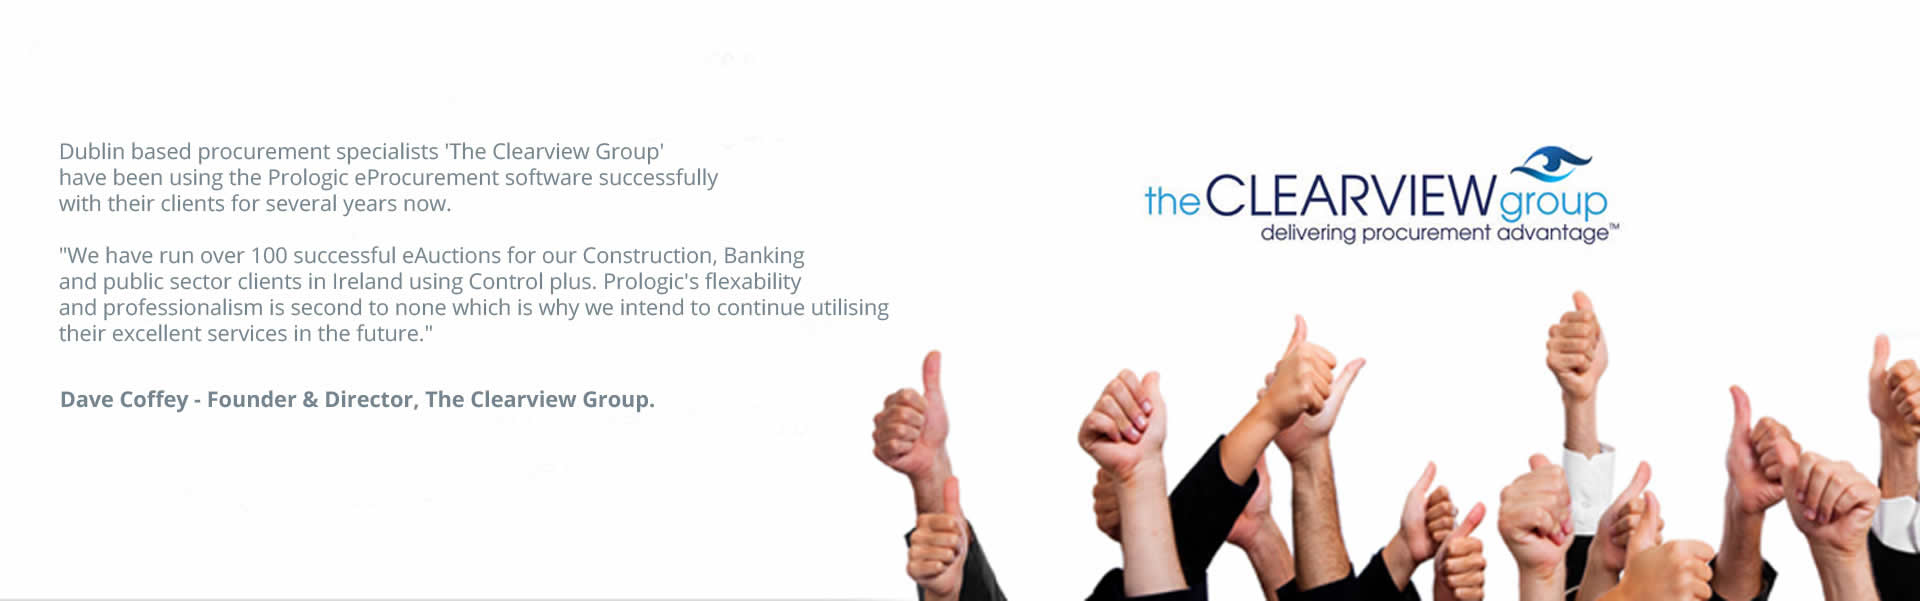 Dublin based procurement specialists The Clearview Group 
have been using the Prologic eProcurement software successfully 
with their clients for several years now. We have run over 100 successful eAuctions for our Construction, Banking 
and public sector clients in Ireland using Control plus. Prologic's flexability and professionalism is second to none which is why we intend to continue utilising their excellent services in the future. Dave Coffey - Founder & Director, The Clearview Group.